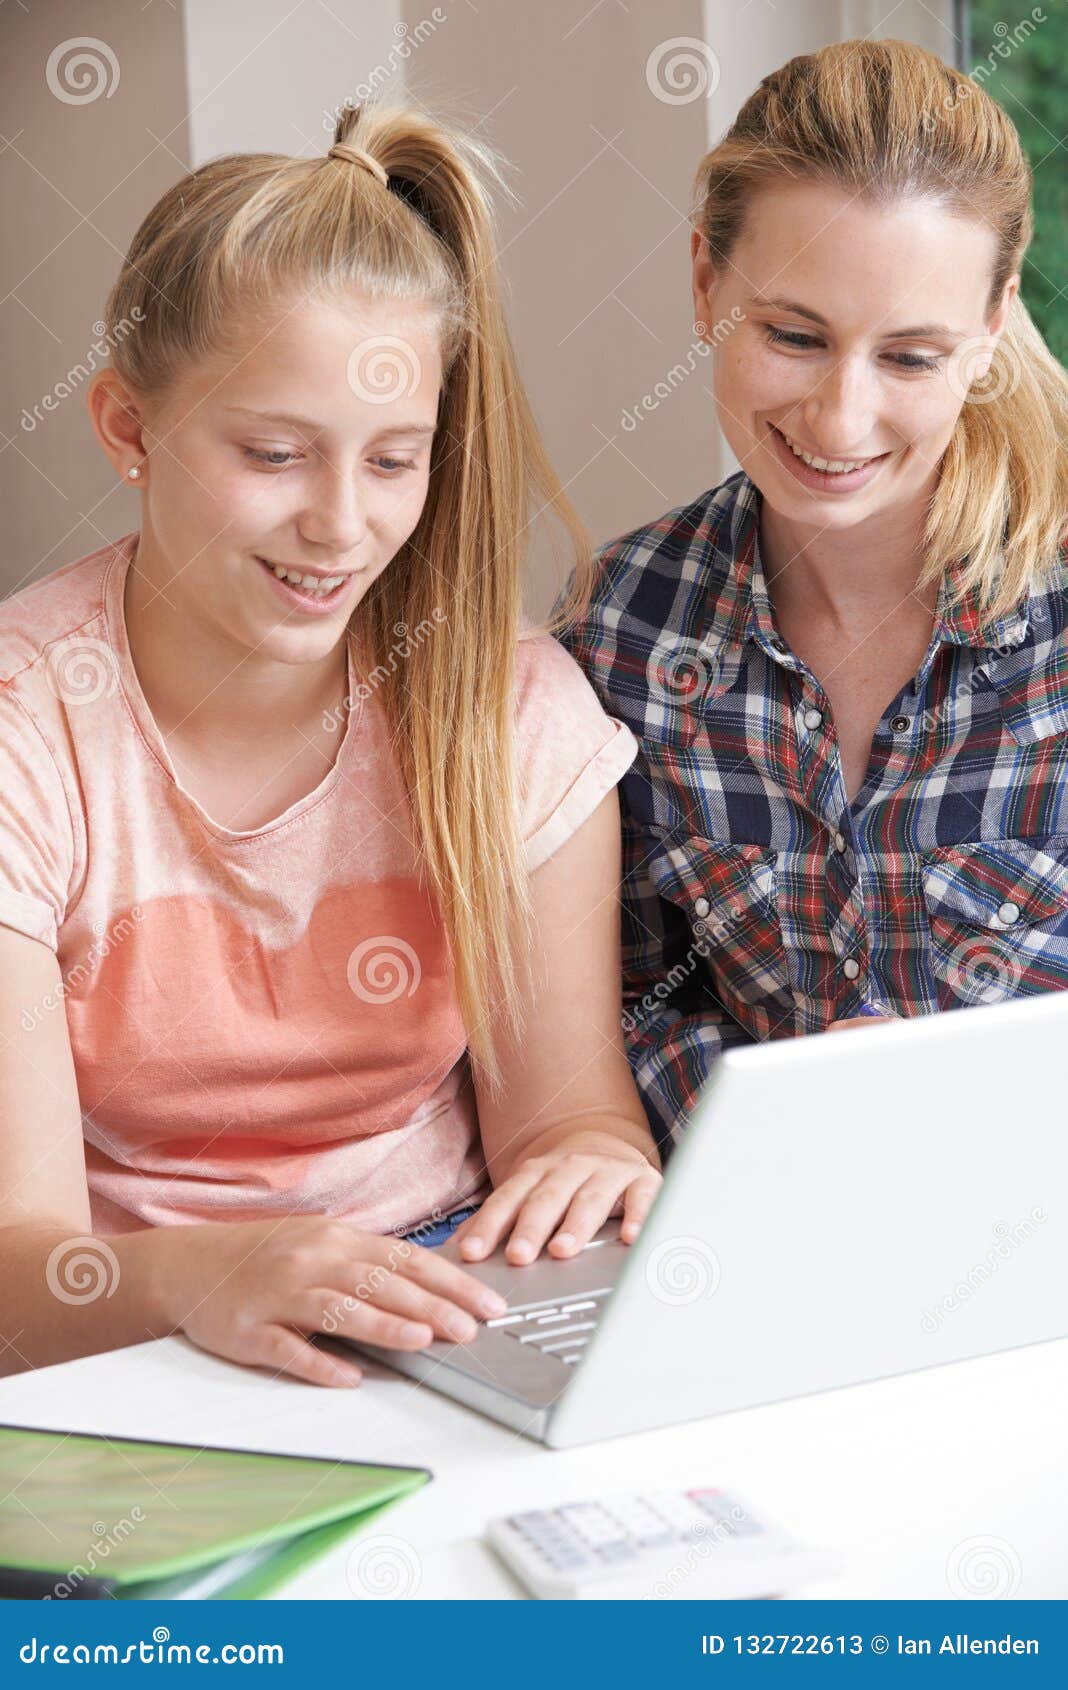 female home tutor helping girl with studies using laptop